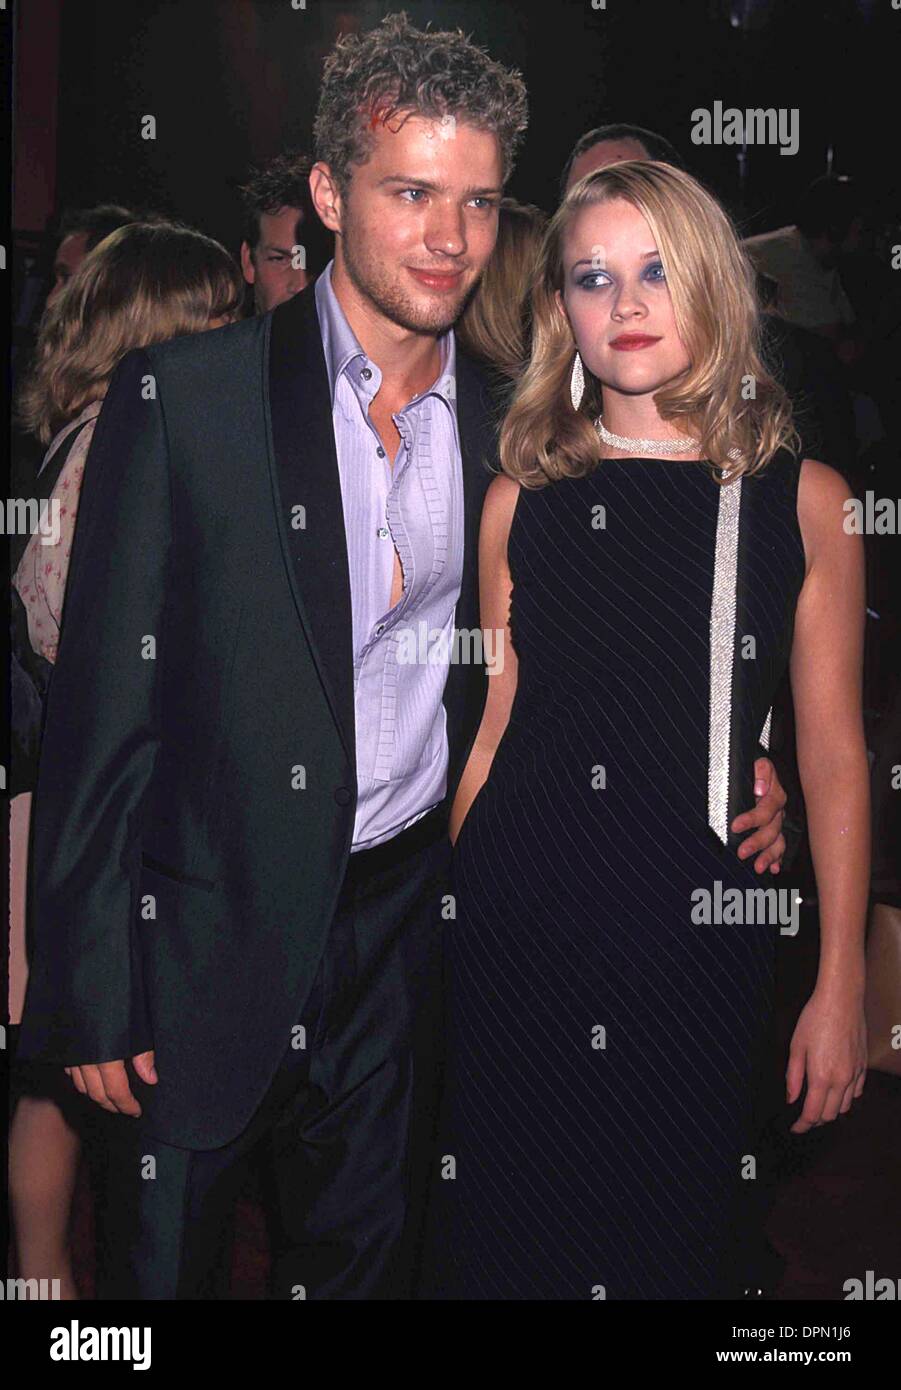 Mar. 10, 2006 - REESE WITHERSPOON WITH RYAN PHILLIPPE.''54'' PREMIERE IN HOLLYWOOD , CALIFORNIA 08-24-1998.K13083LR. LISA ROSE-(Credit Image: © Globe Photos/ZUMAPRESS.com) Stock Photo